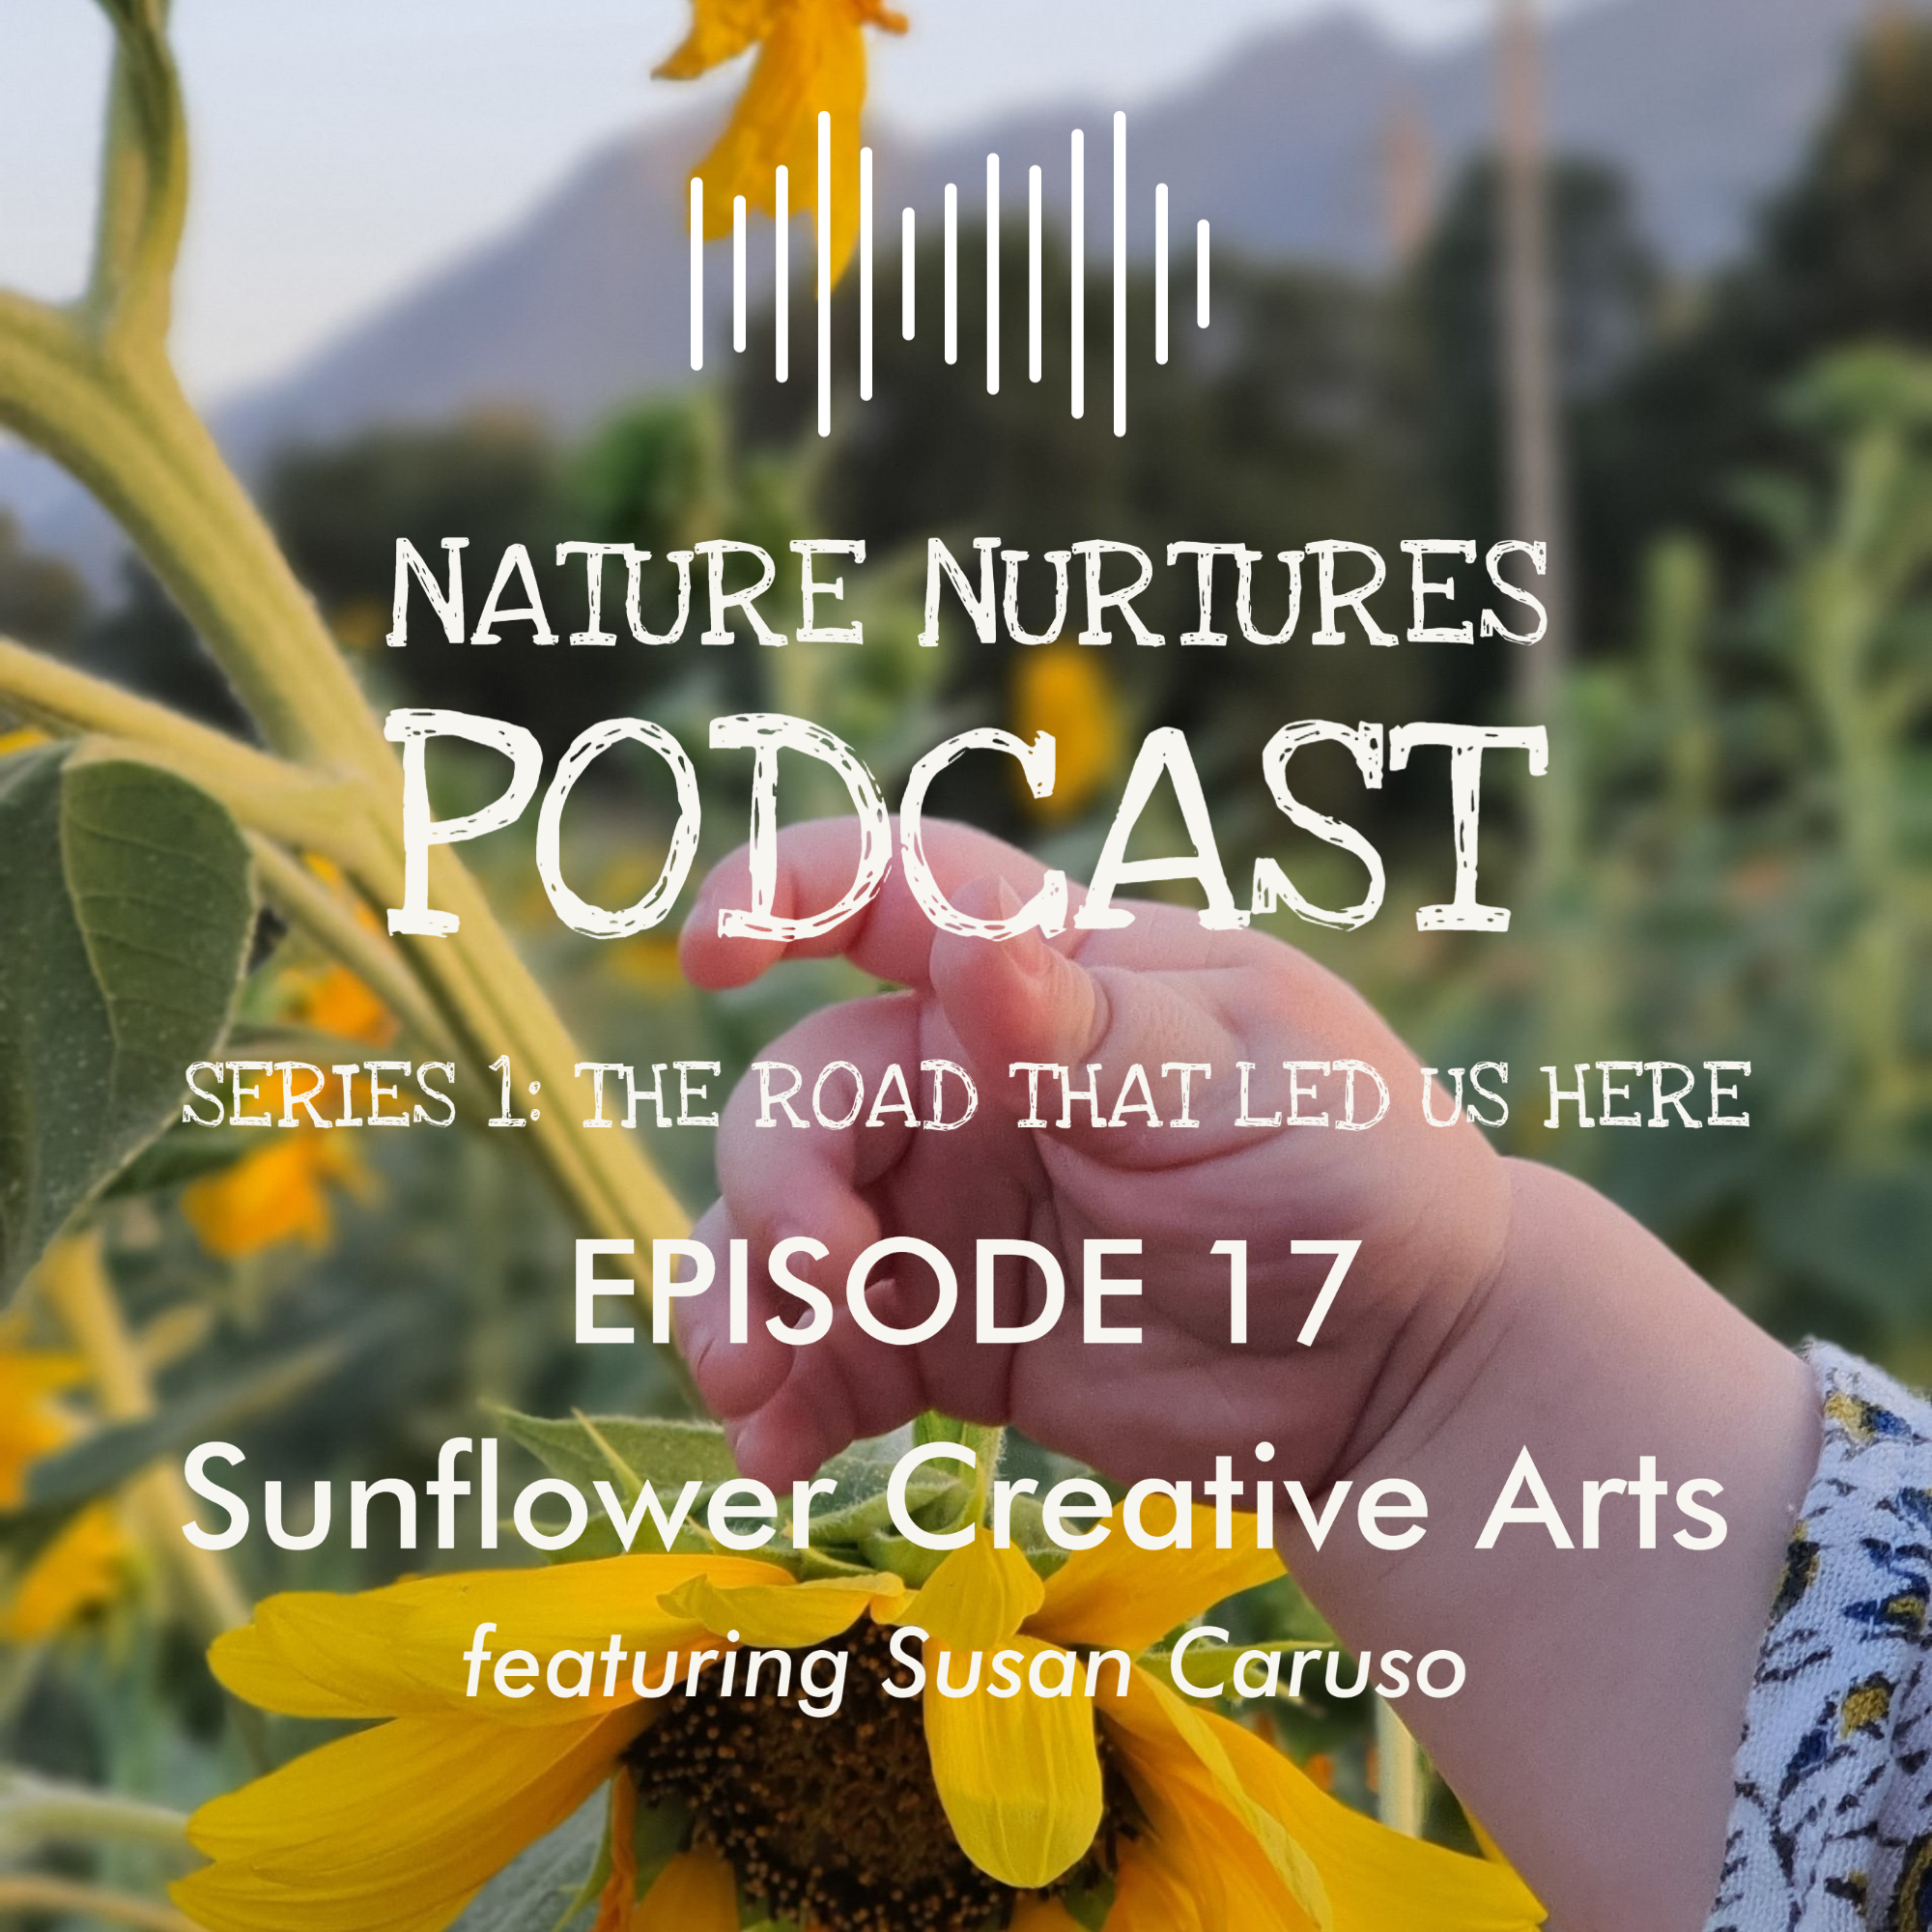 Sunflower Creative Arts, with Susan Caruso Part 2